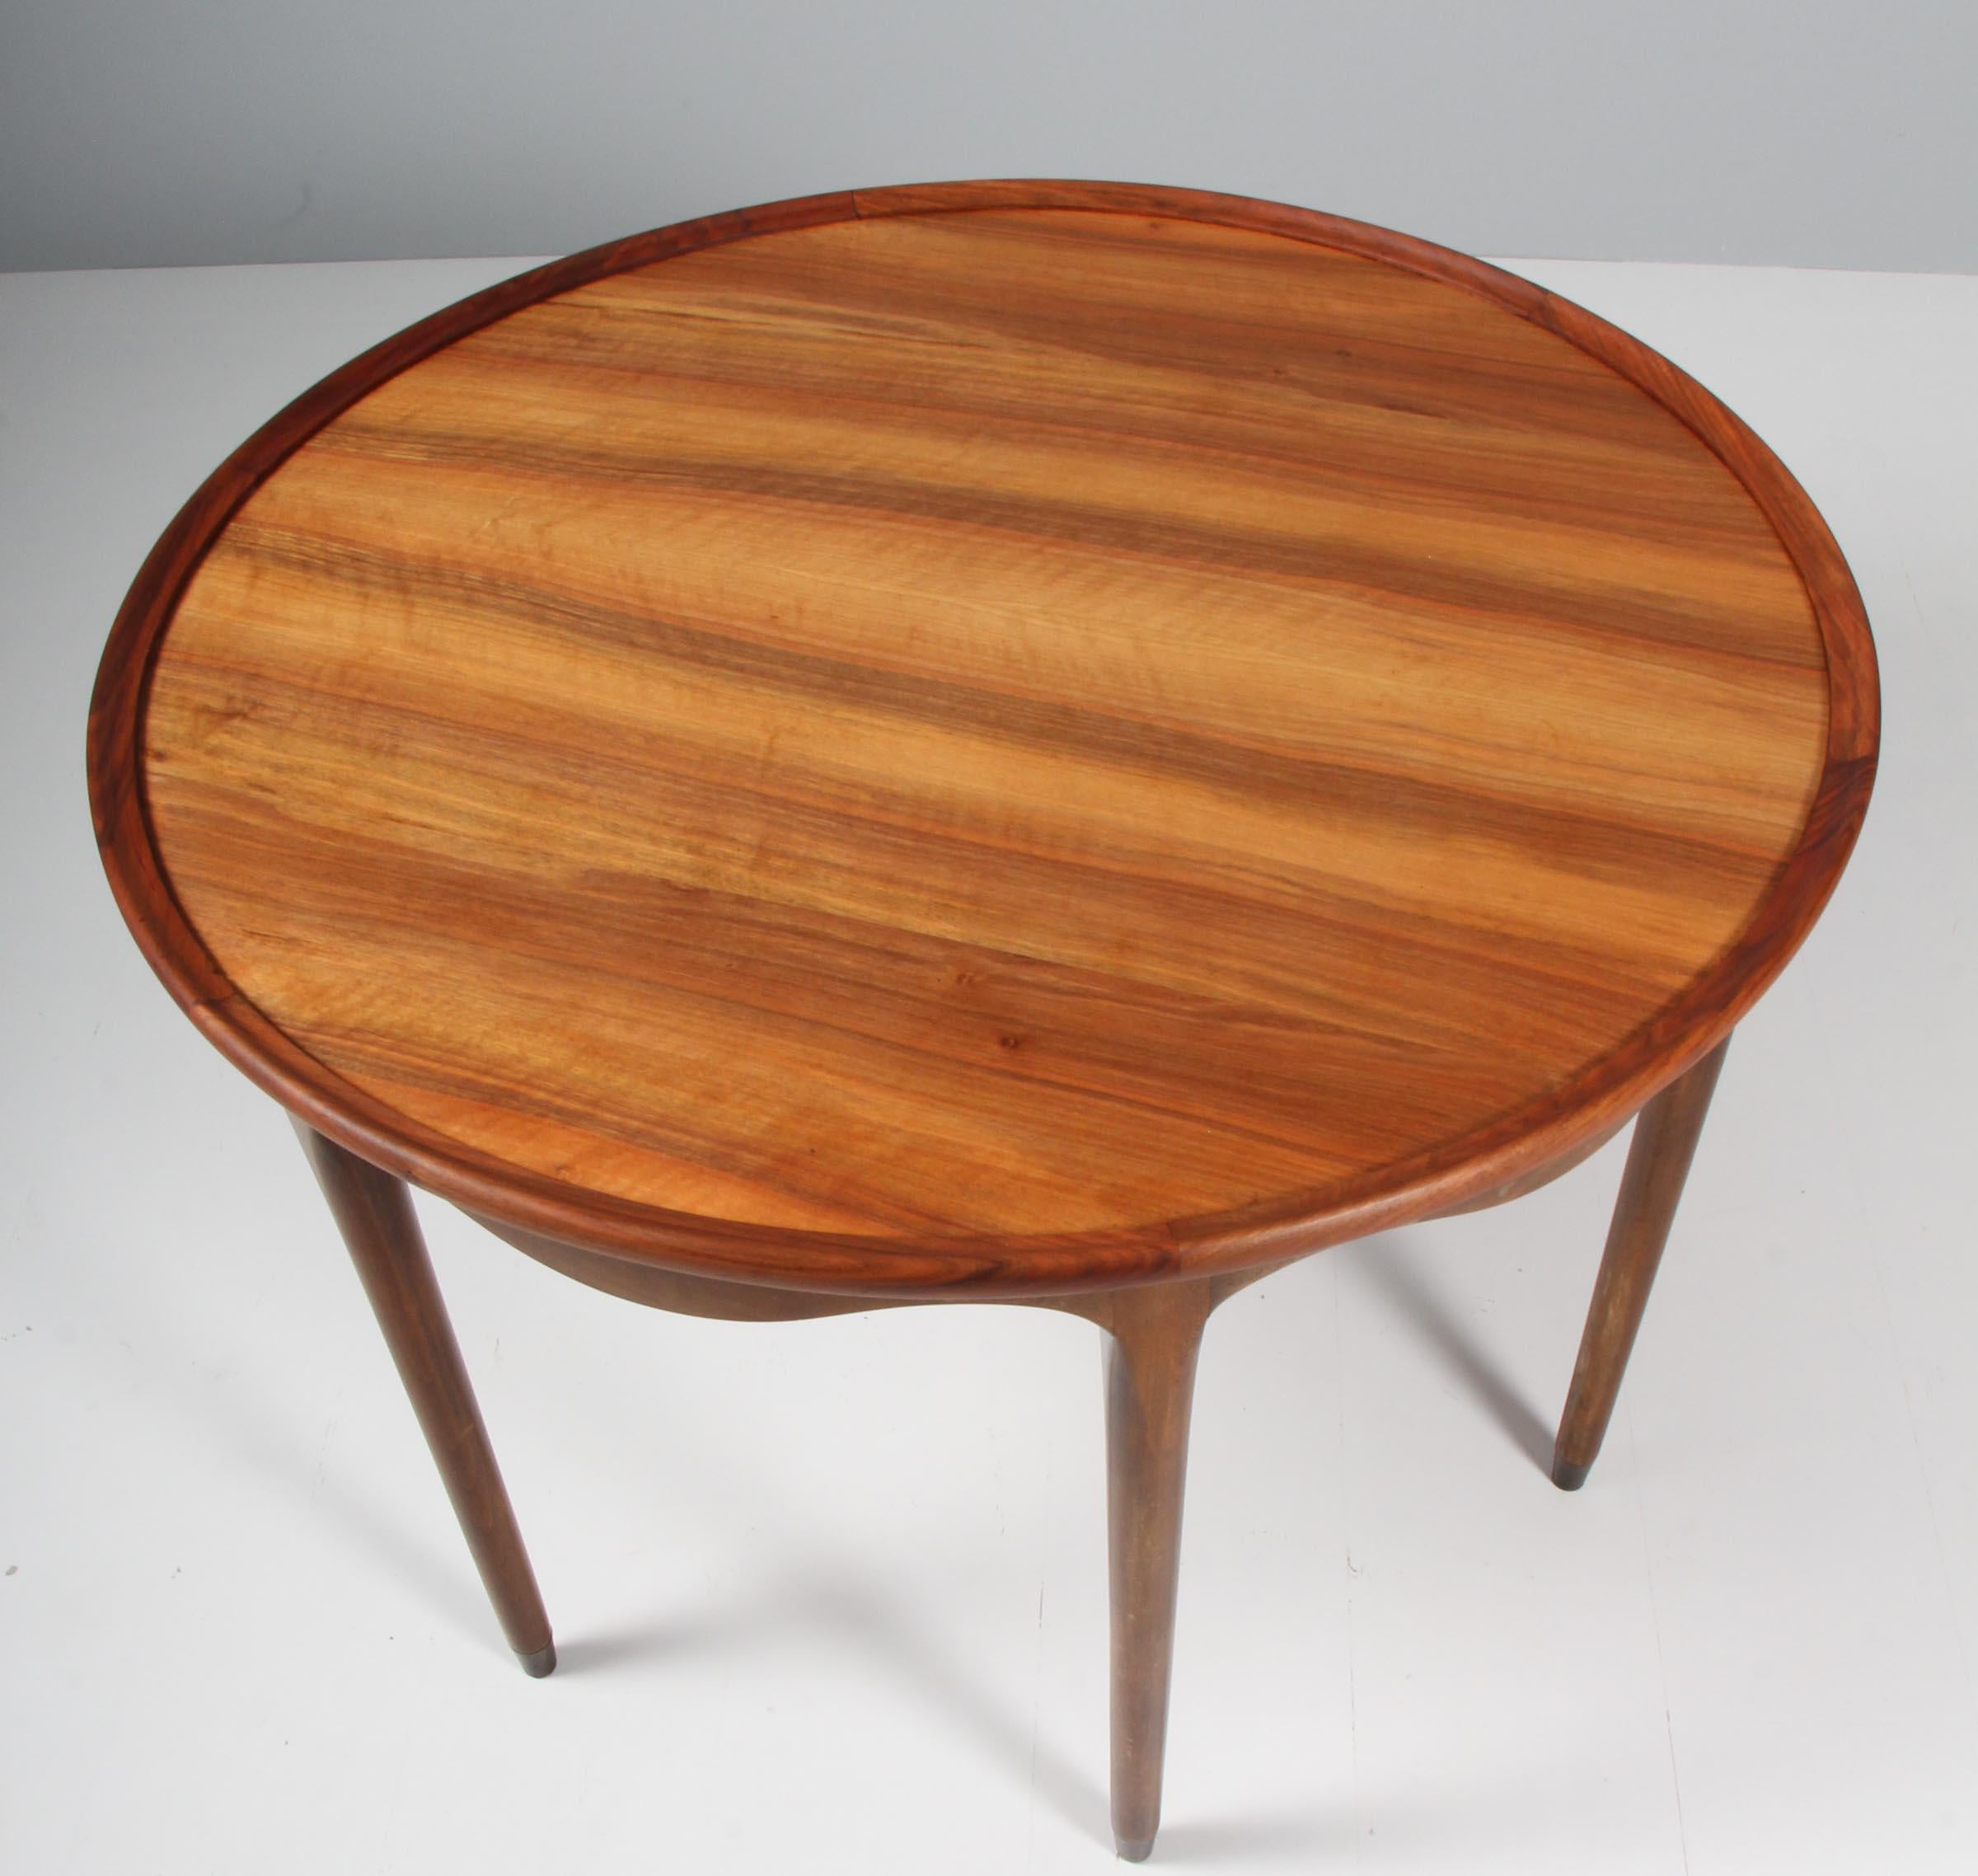 William Watting coffee table with top of veenered nutwood, solid edge.

Legs of stained beech and brass feet. Made in the 1940-1950s.